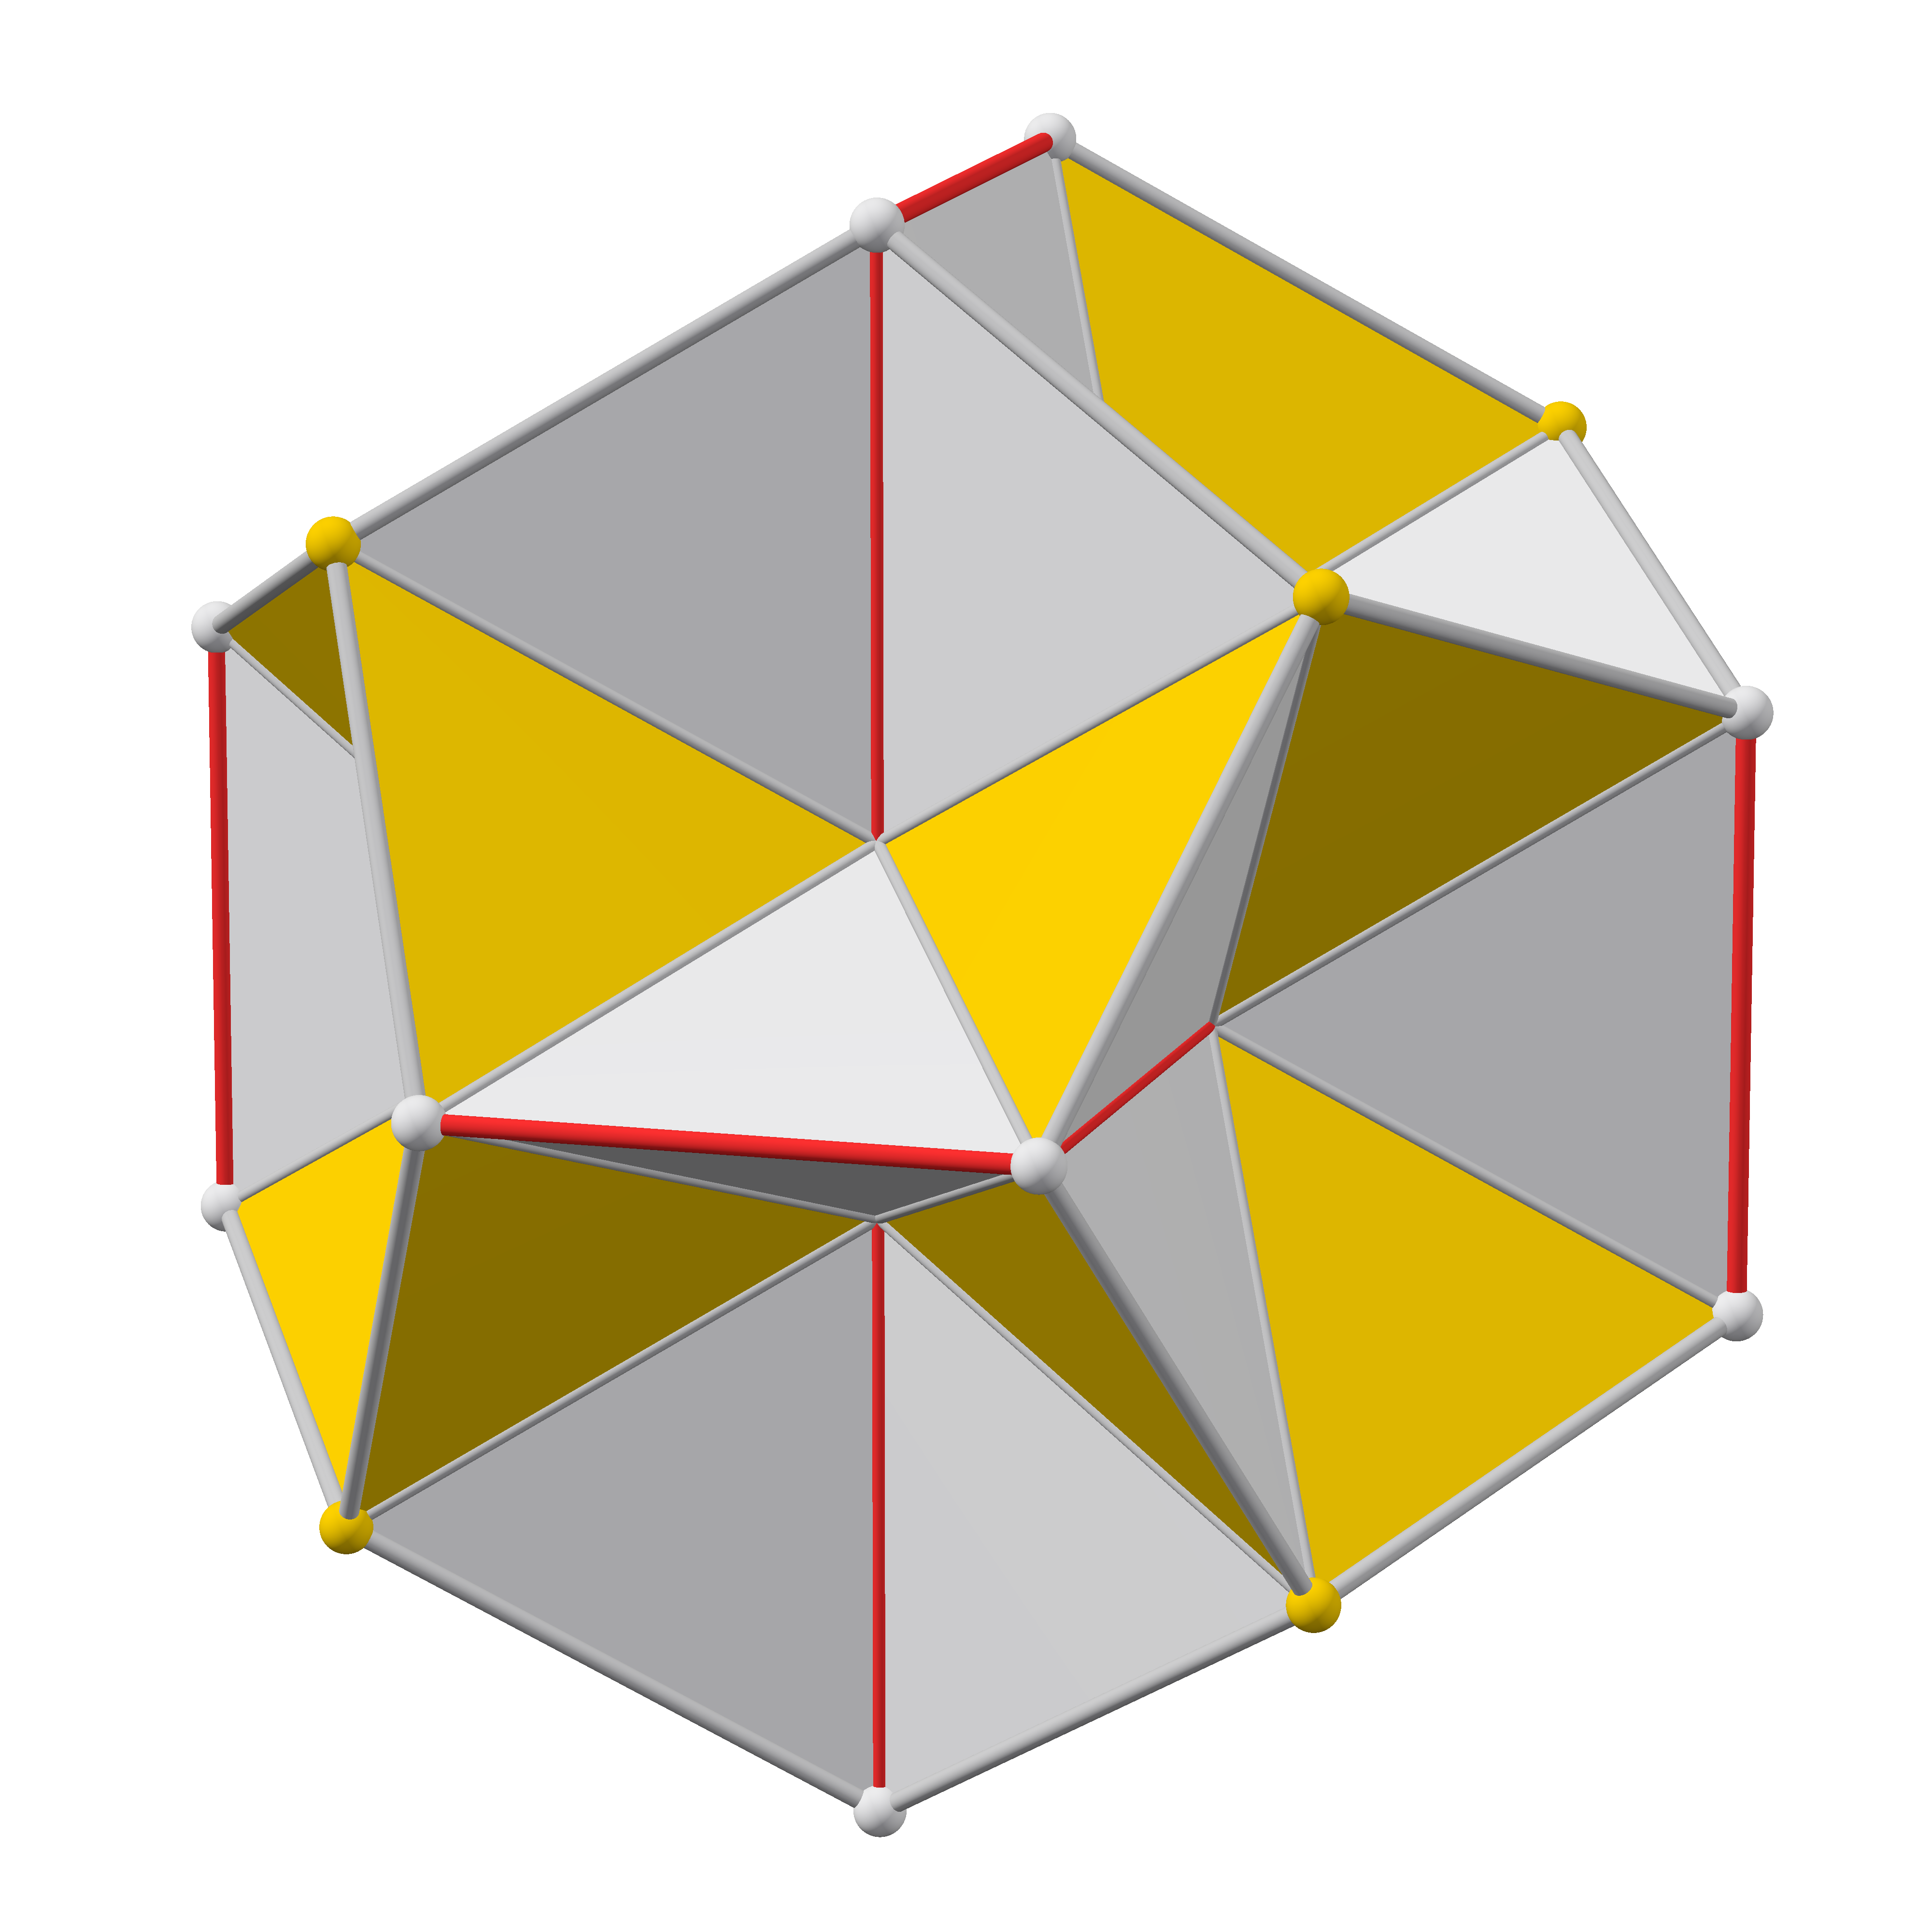 Dodecahedron of doom